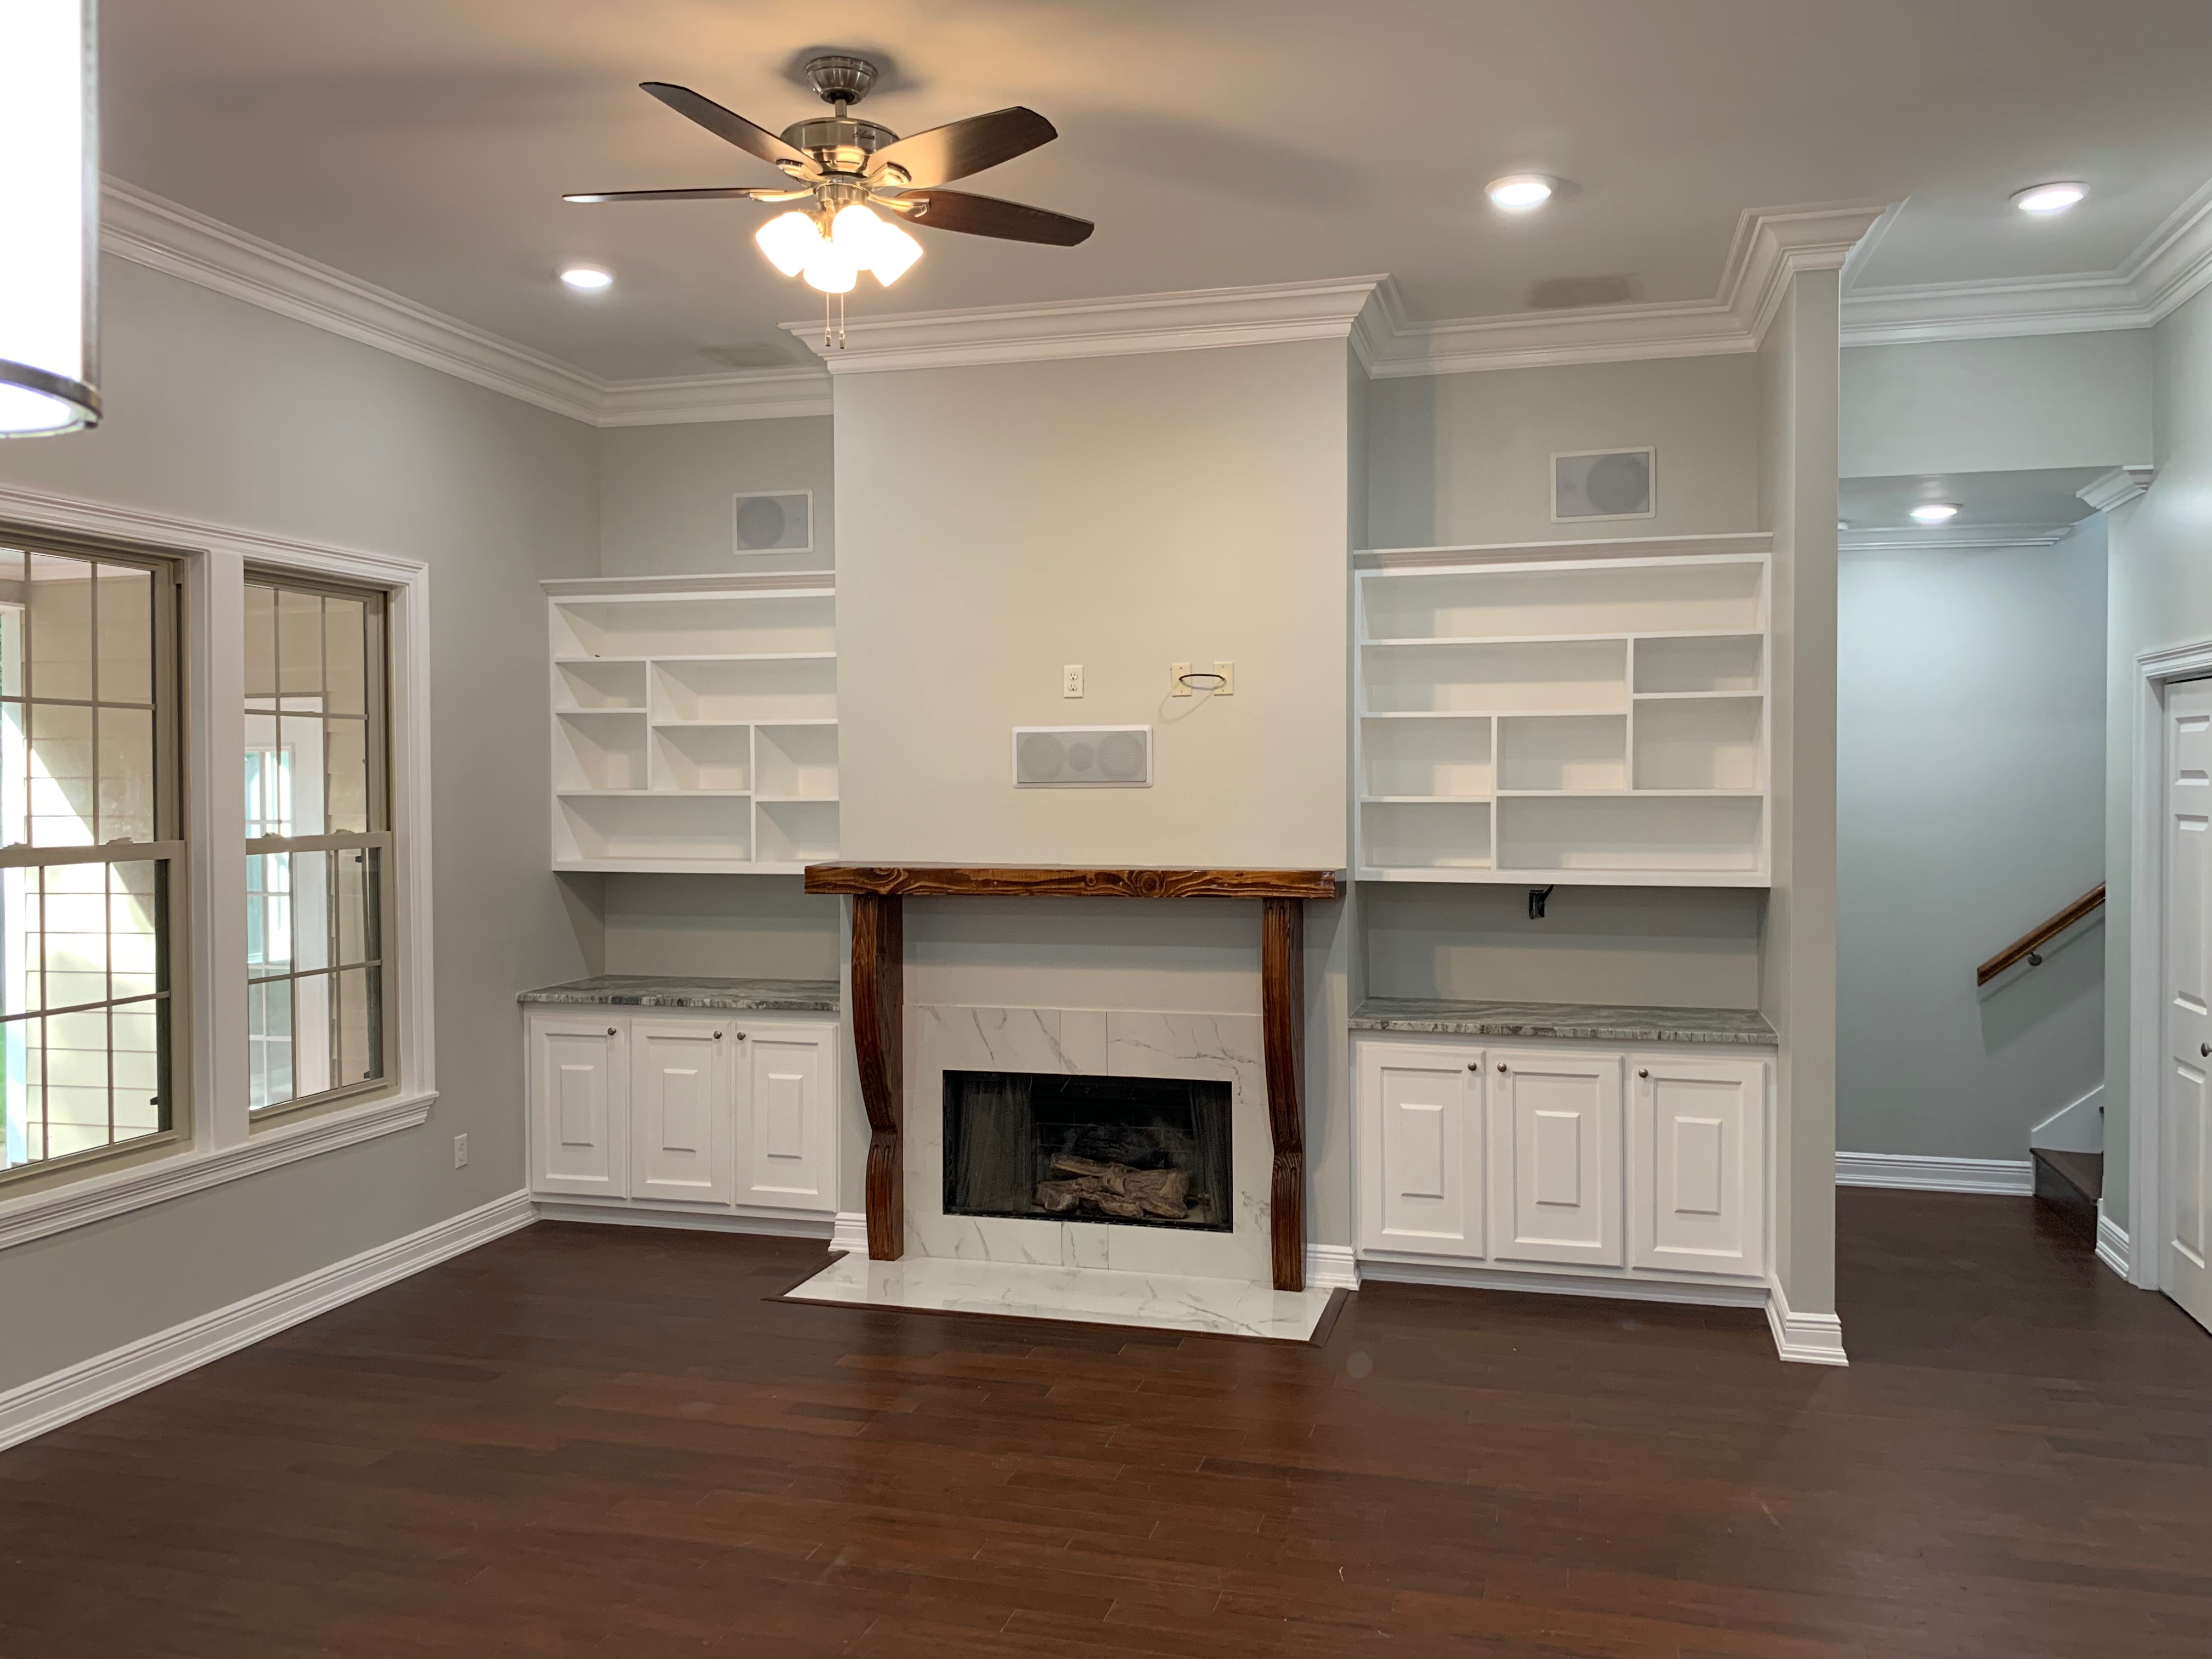 Best Remodeling Company in Lafayette Louisiana & the surrounding areas